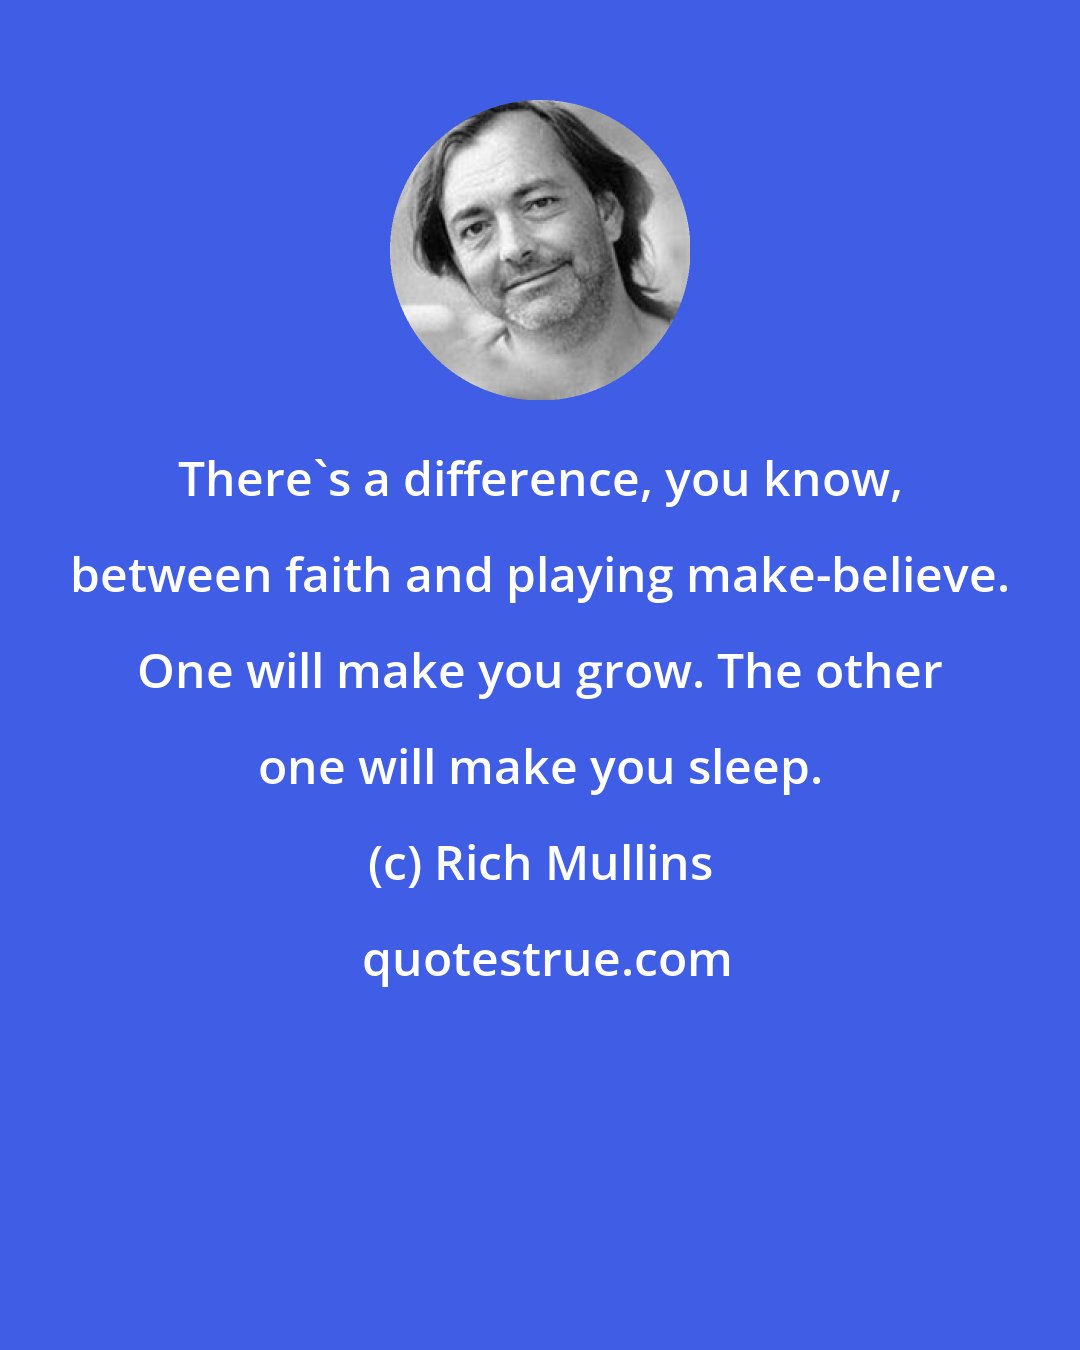 Rich Mullins: There's a difference, you know, between faith and playing make-believe. One will make you grow. The other one will make you sleep.